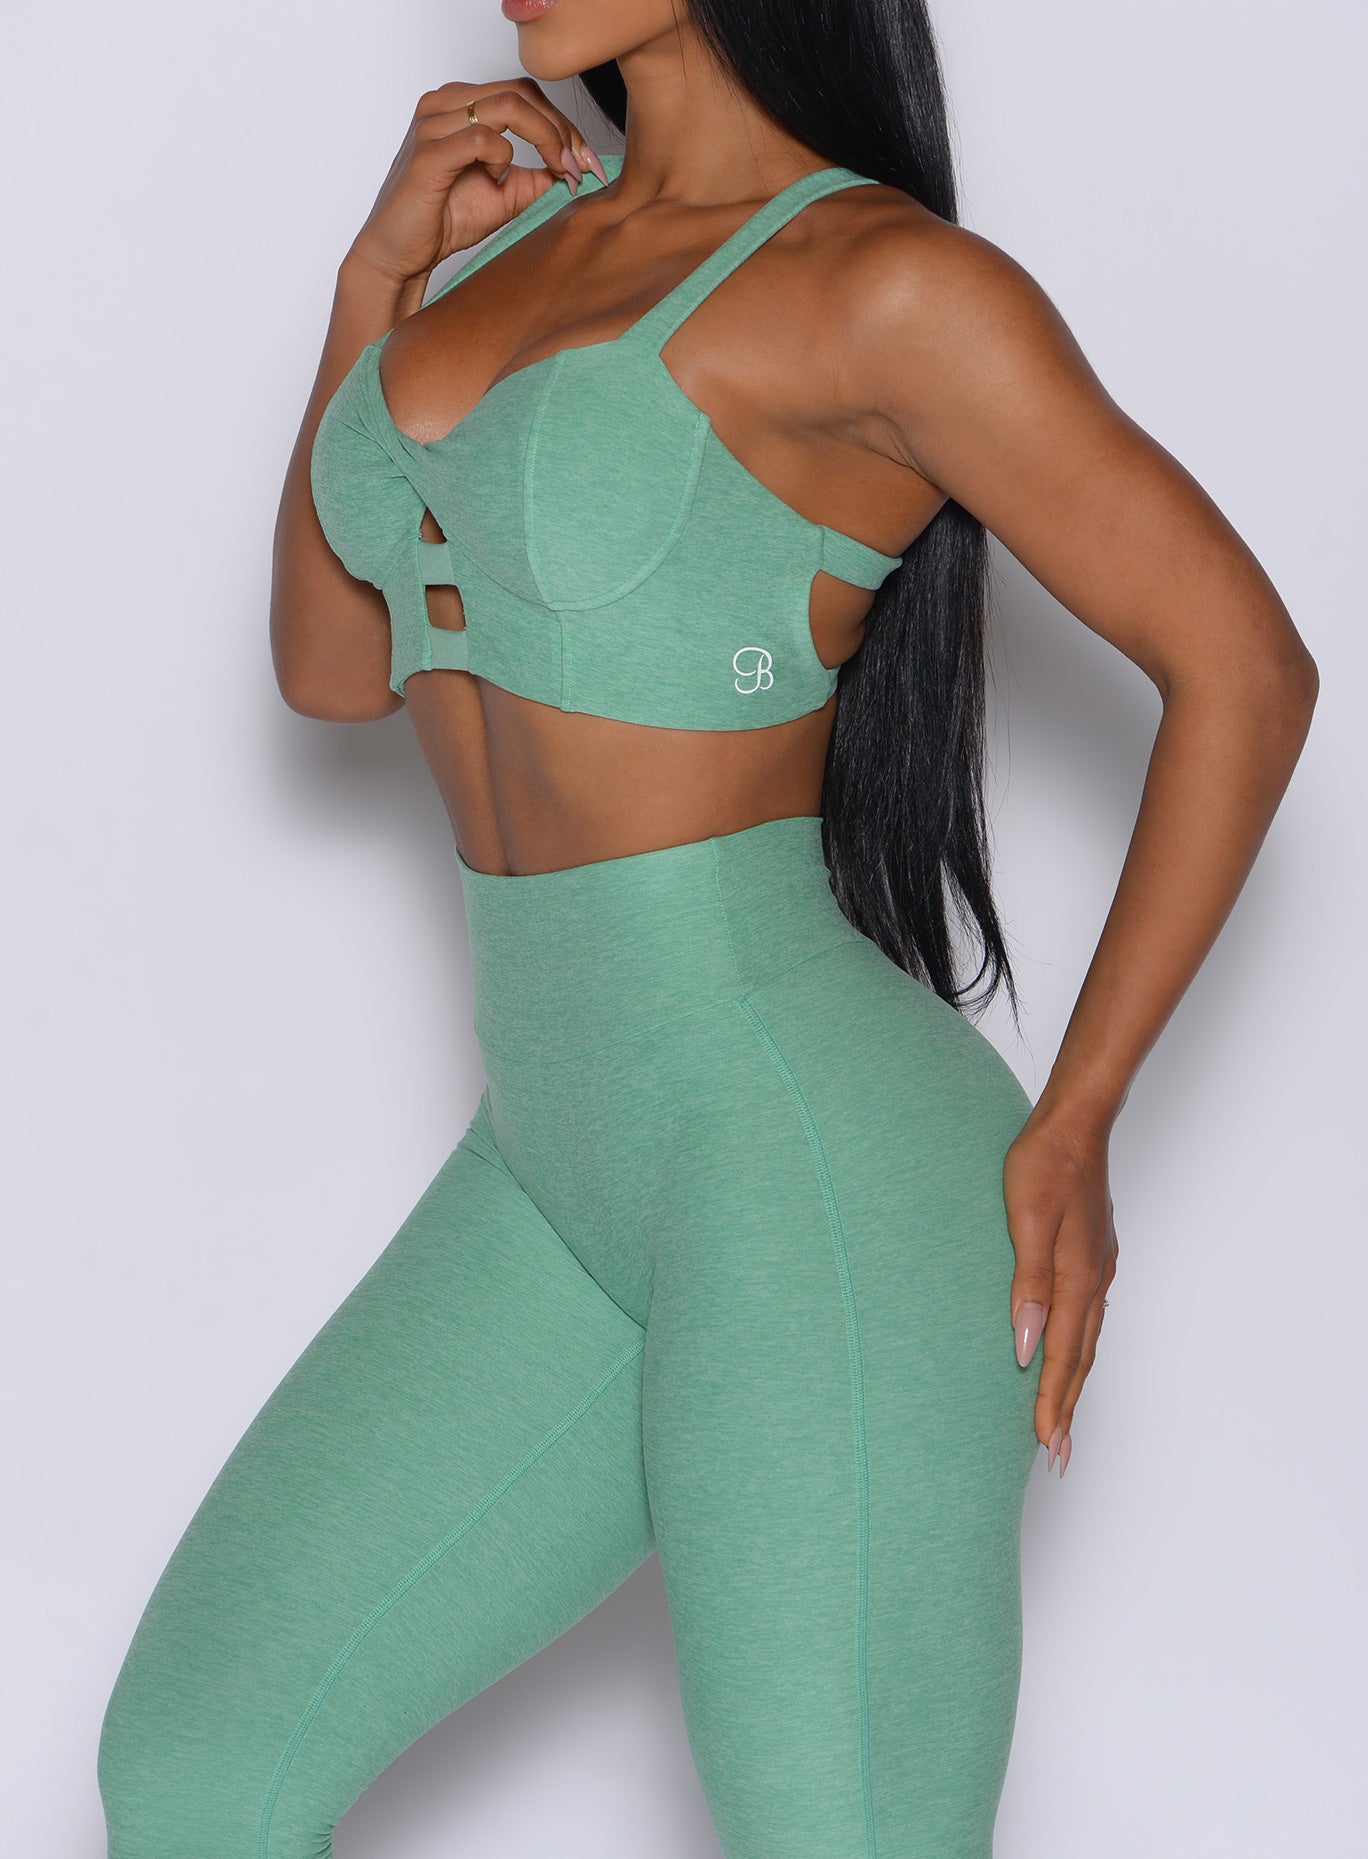 left side profile view of a model wearing our core set bra in sage color along with the matching leggings